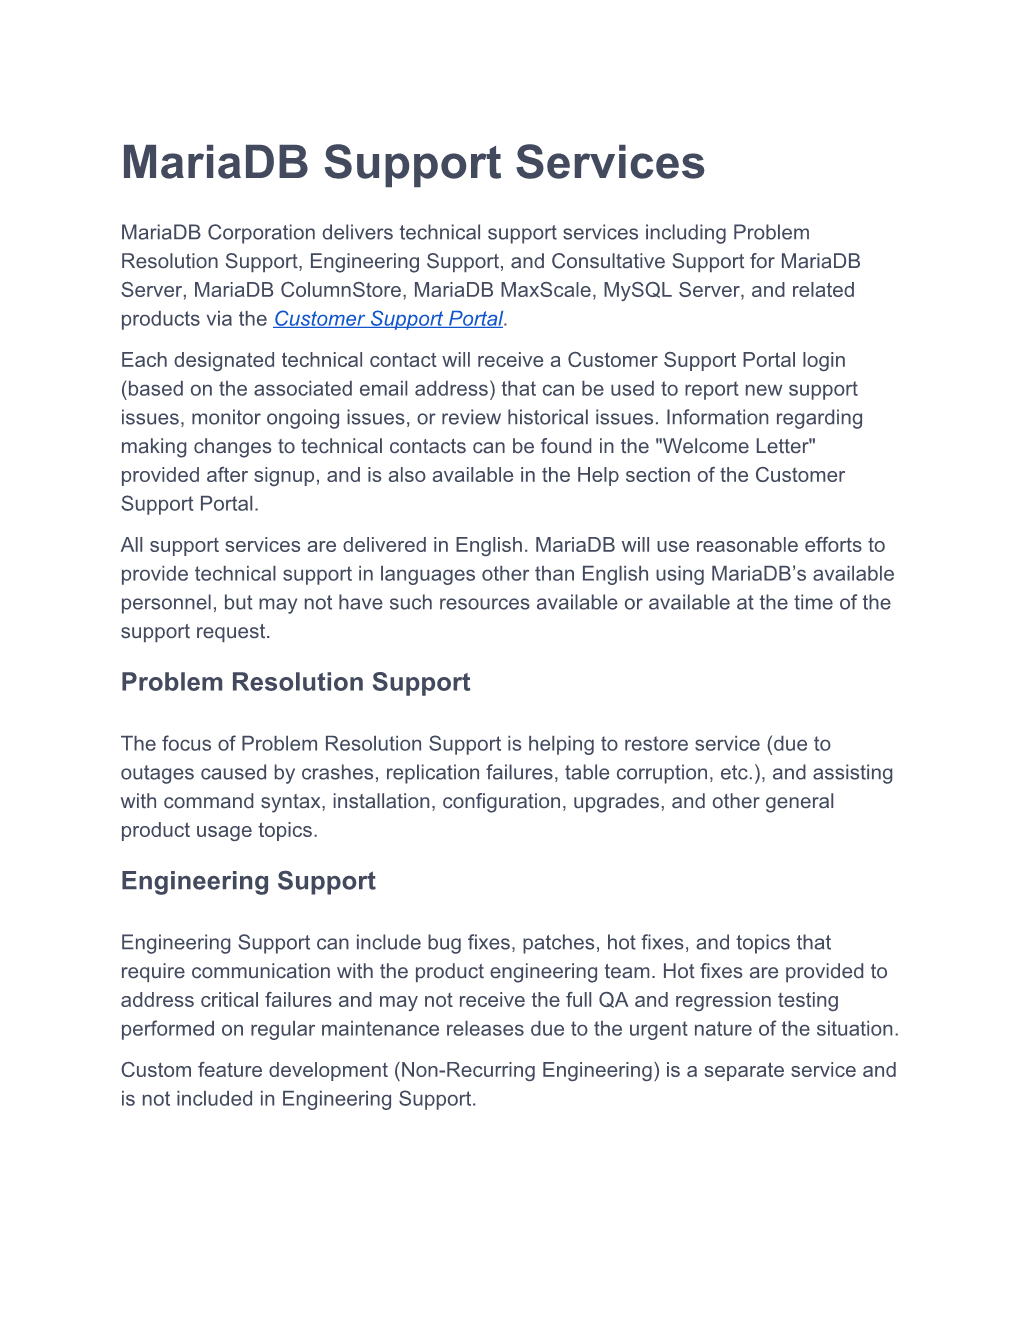 Technical Support Policies